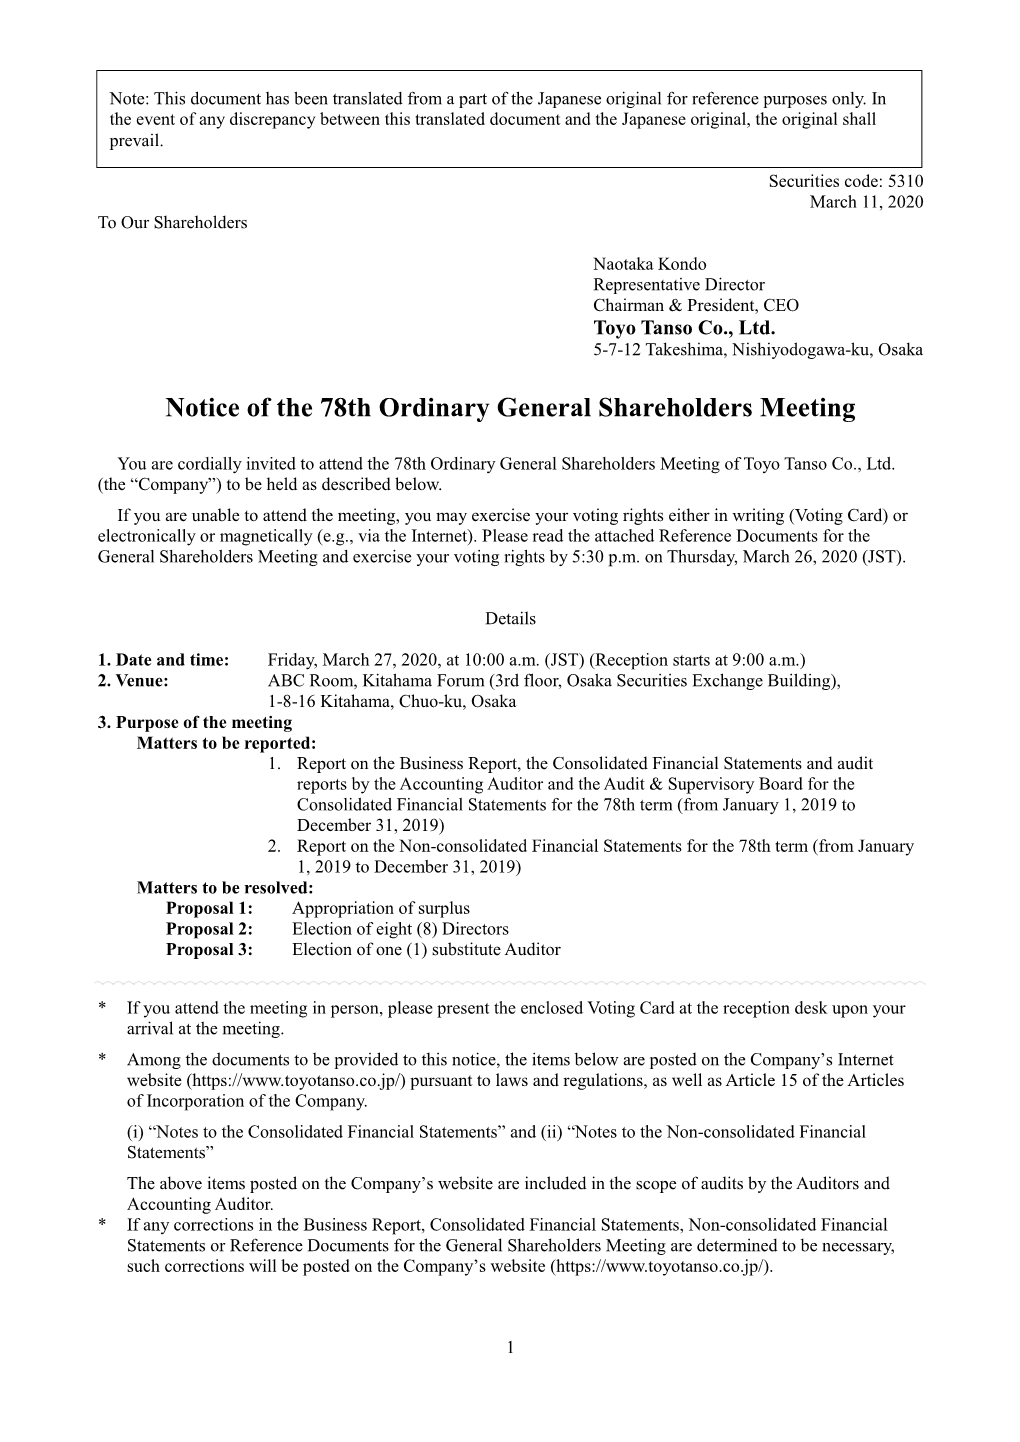 Notice of the 78Th Ordinary General Shareholders Meeting